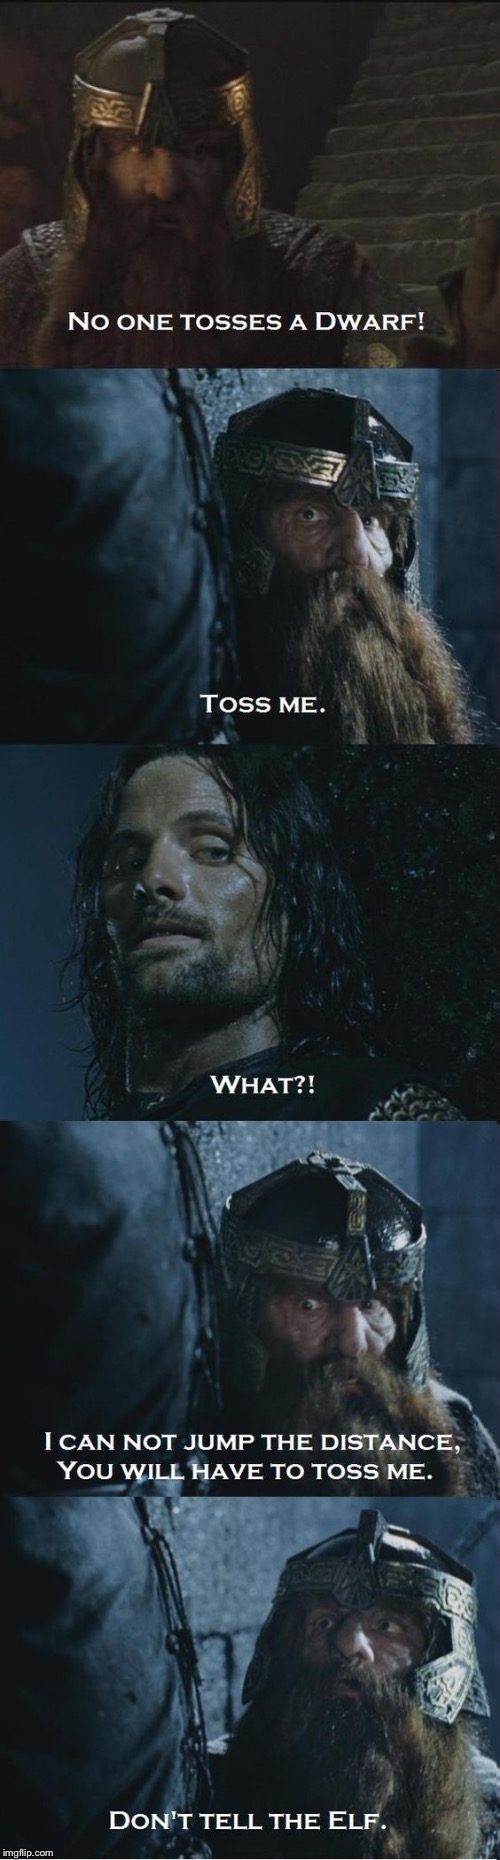 Ironic | image tagged in the lord of the rings,gimli,aragorn,dwarf,lord of the rings,aragorn in battle | made w/ Imgflip meme maker